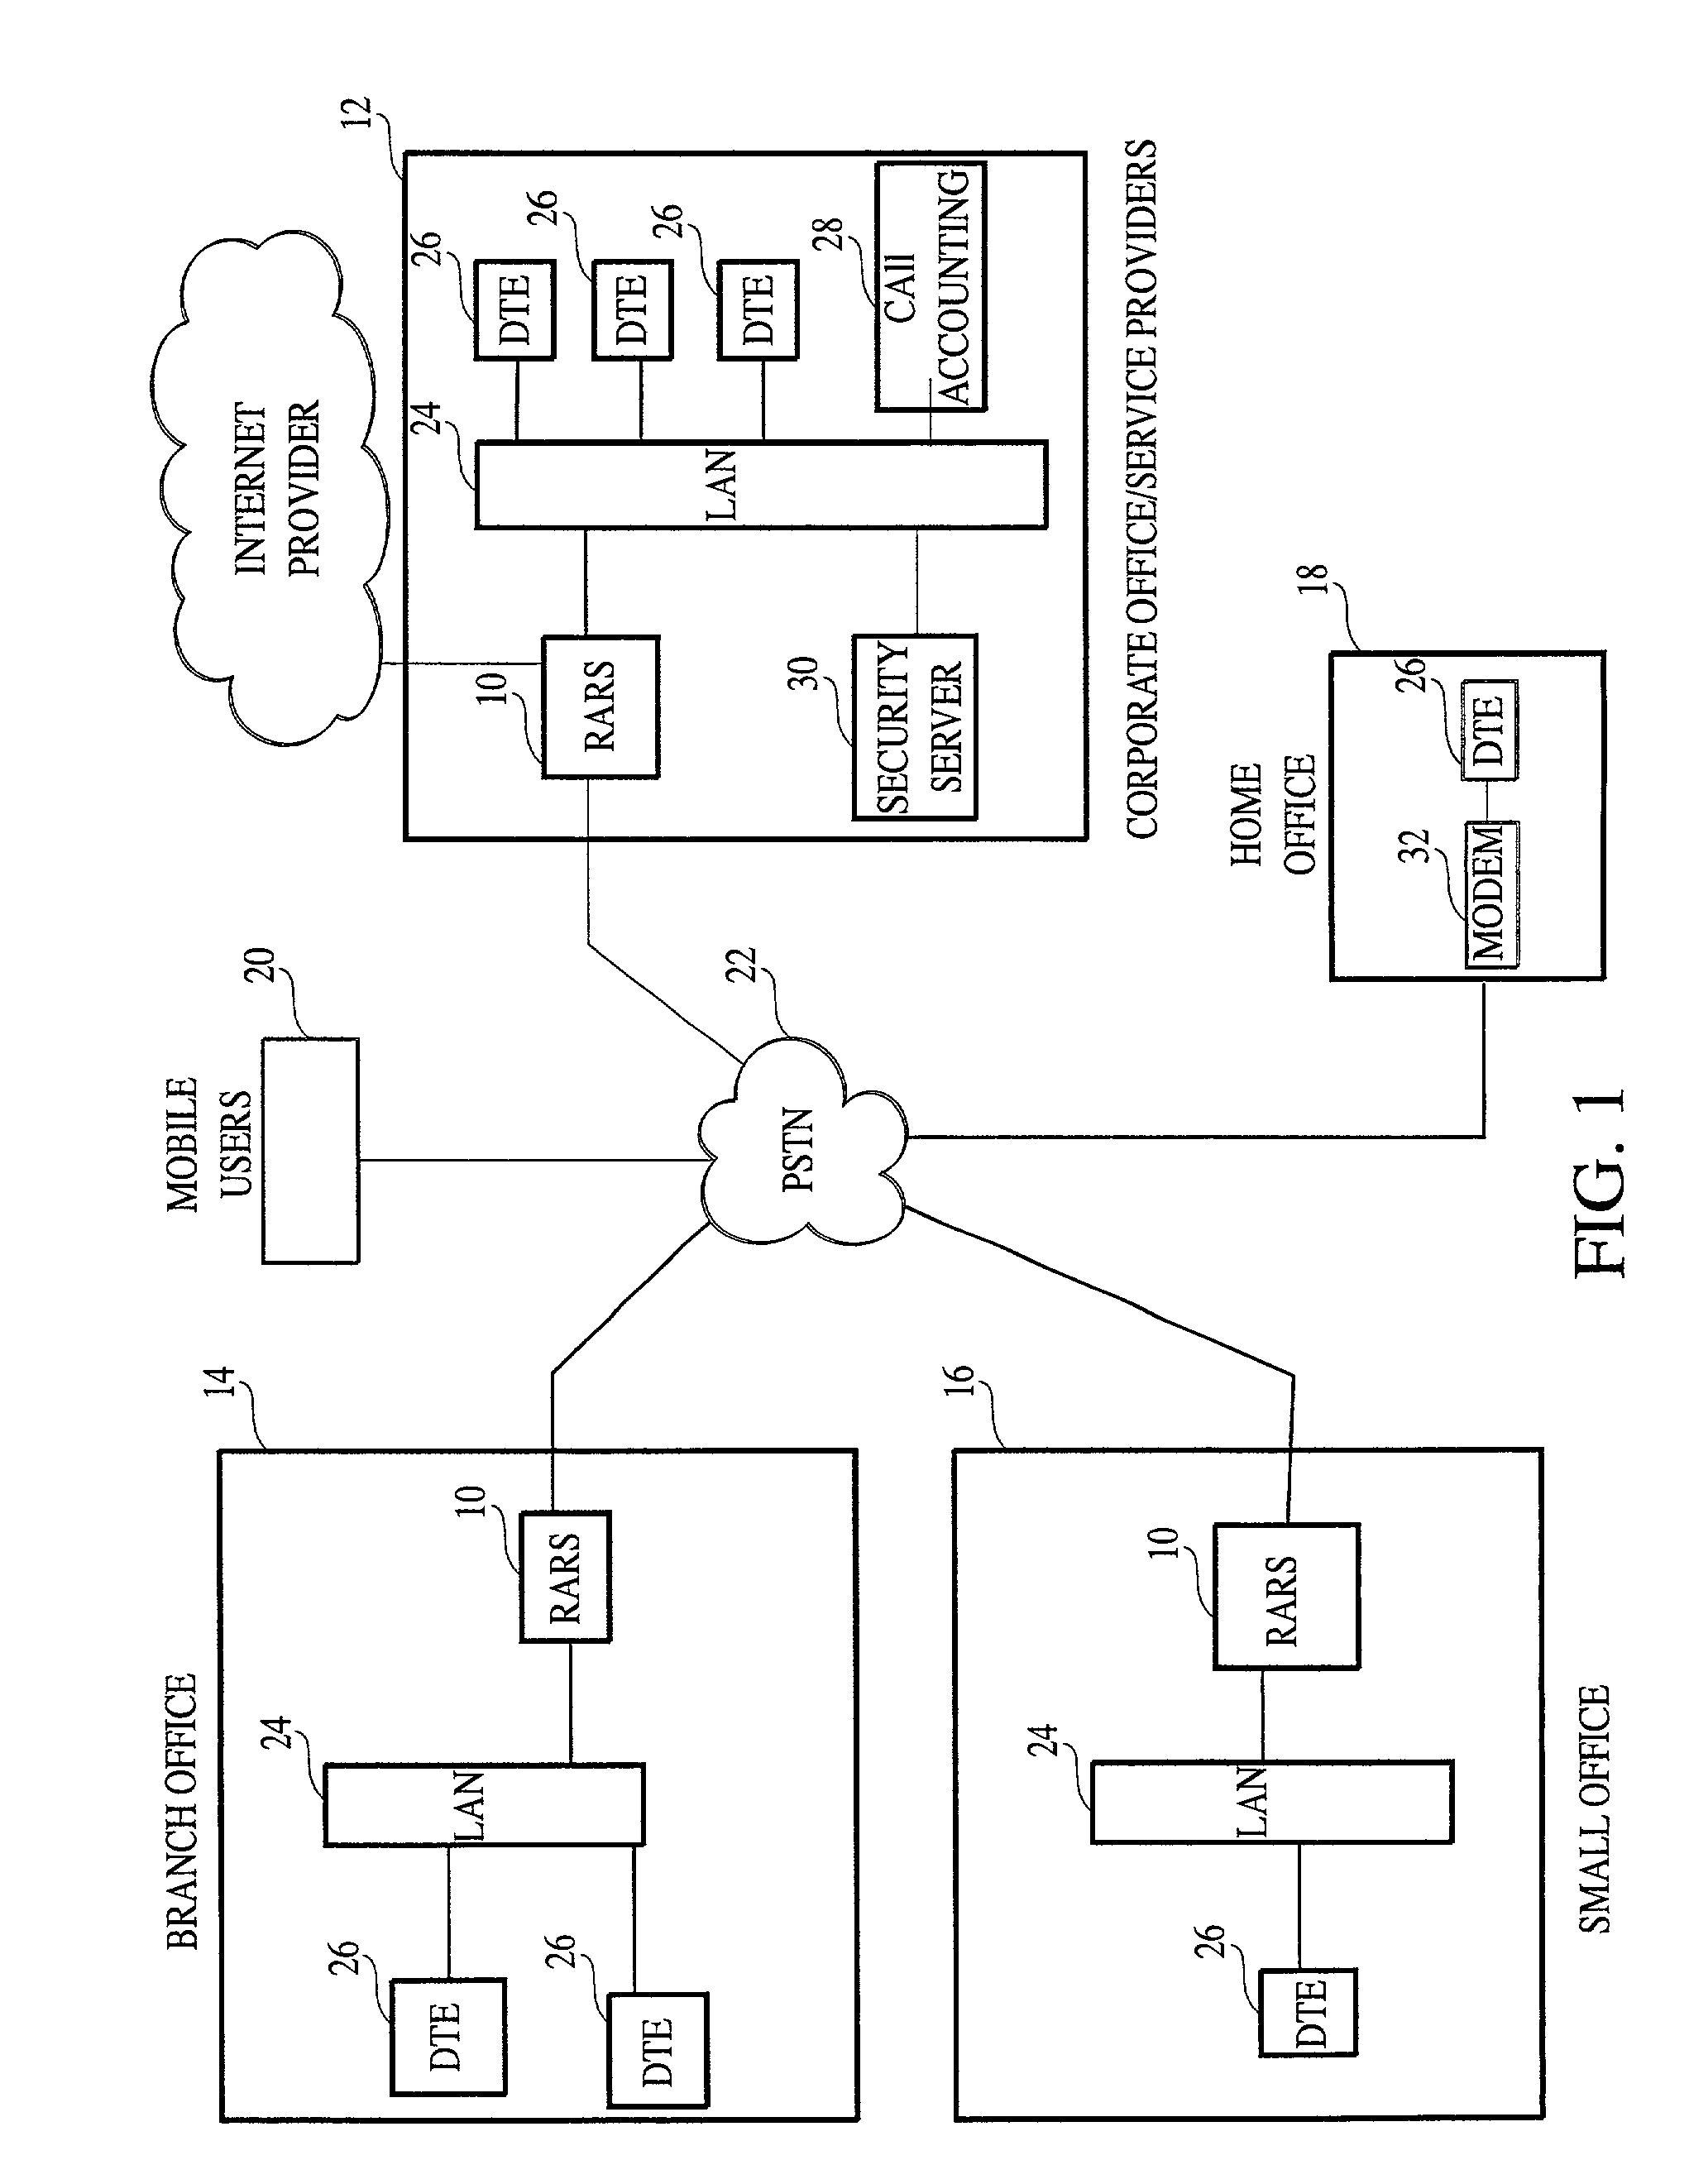 Method and apparatus for operating the internet protocol over a high-speed serial bus